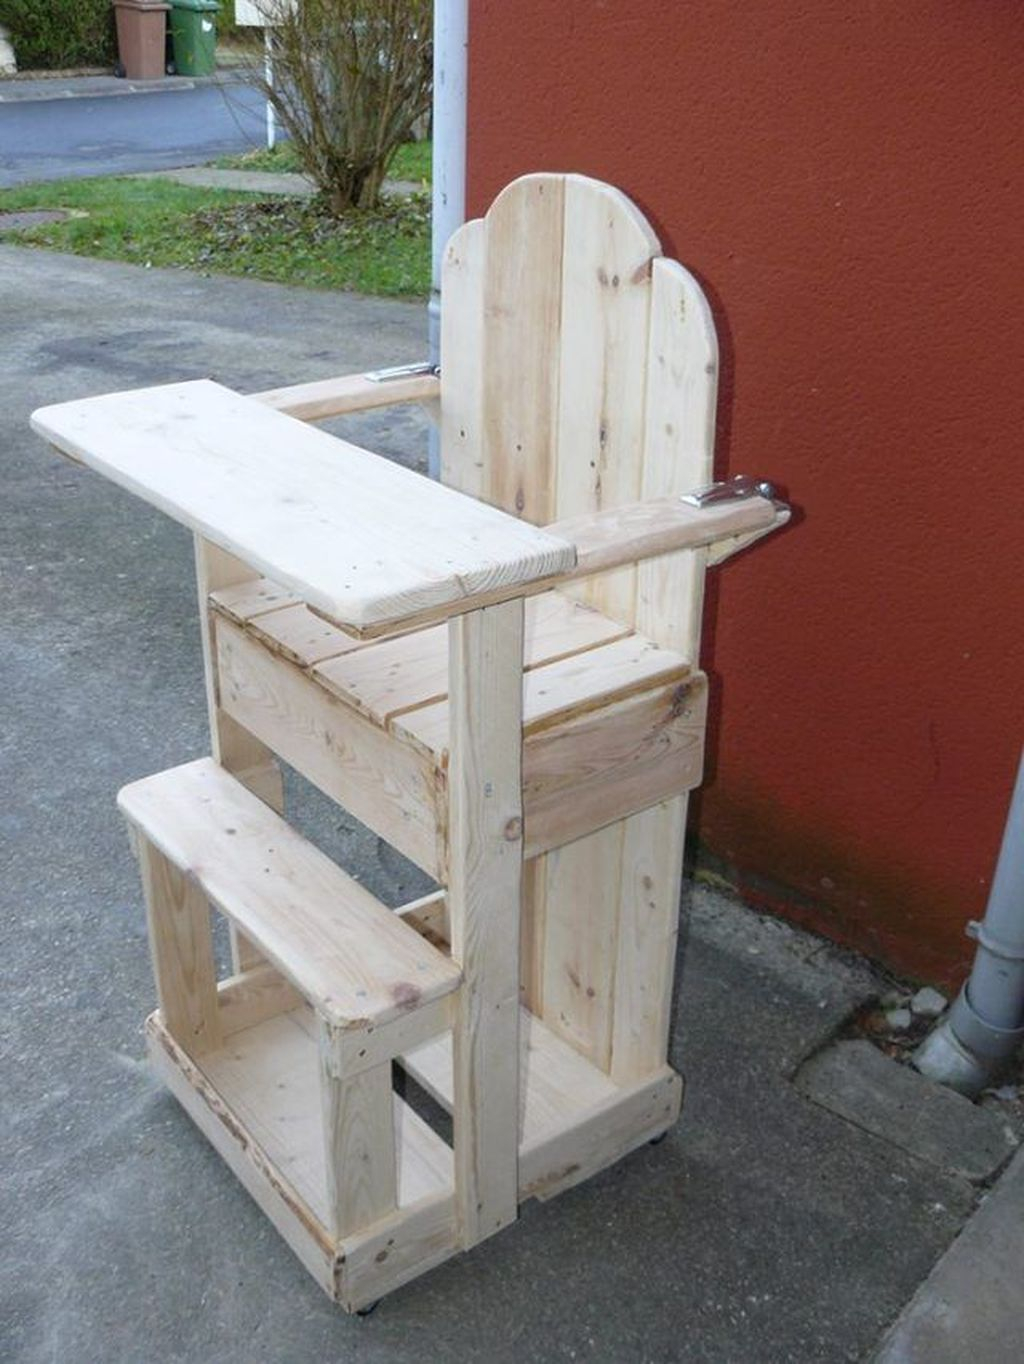 Popular Diy Chair Pallet Design Ideas That You Can Try 34